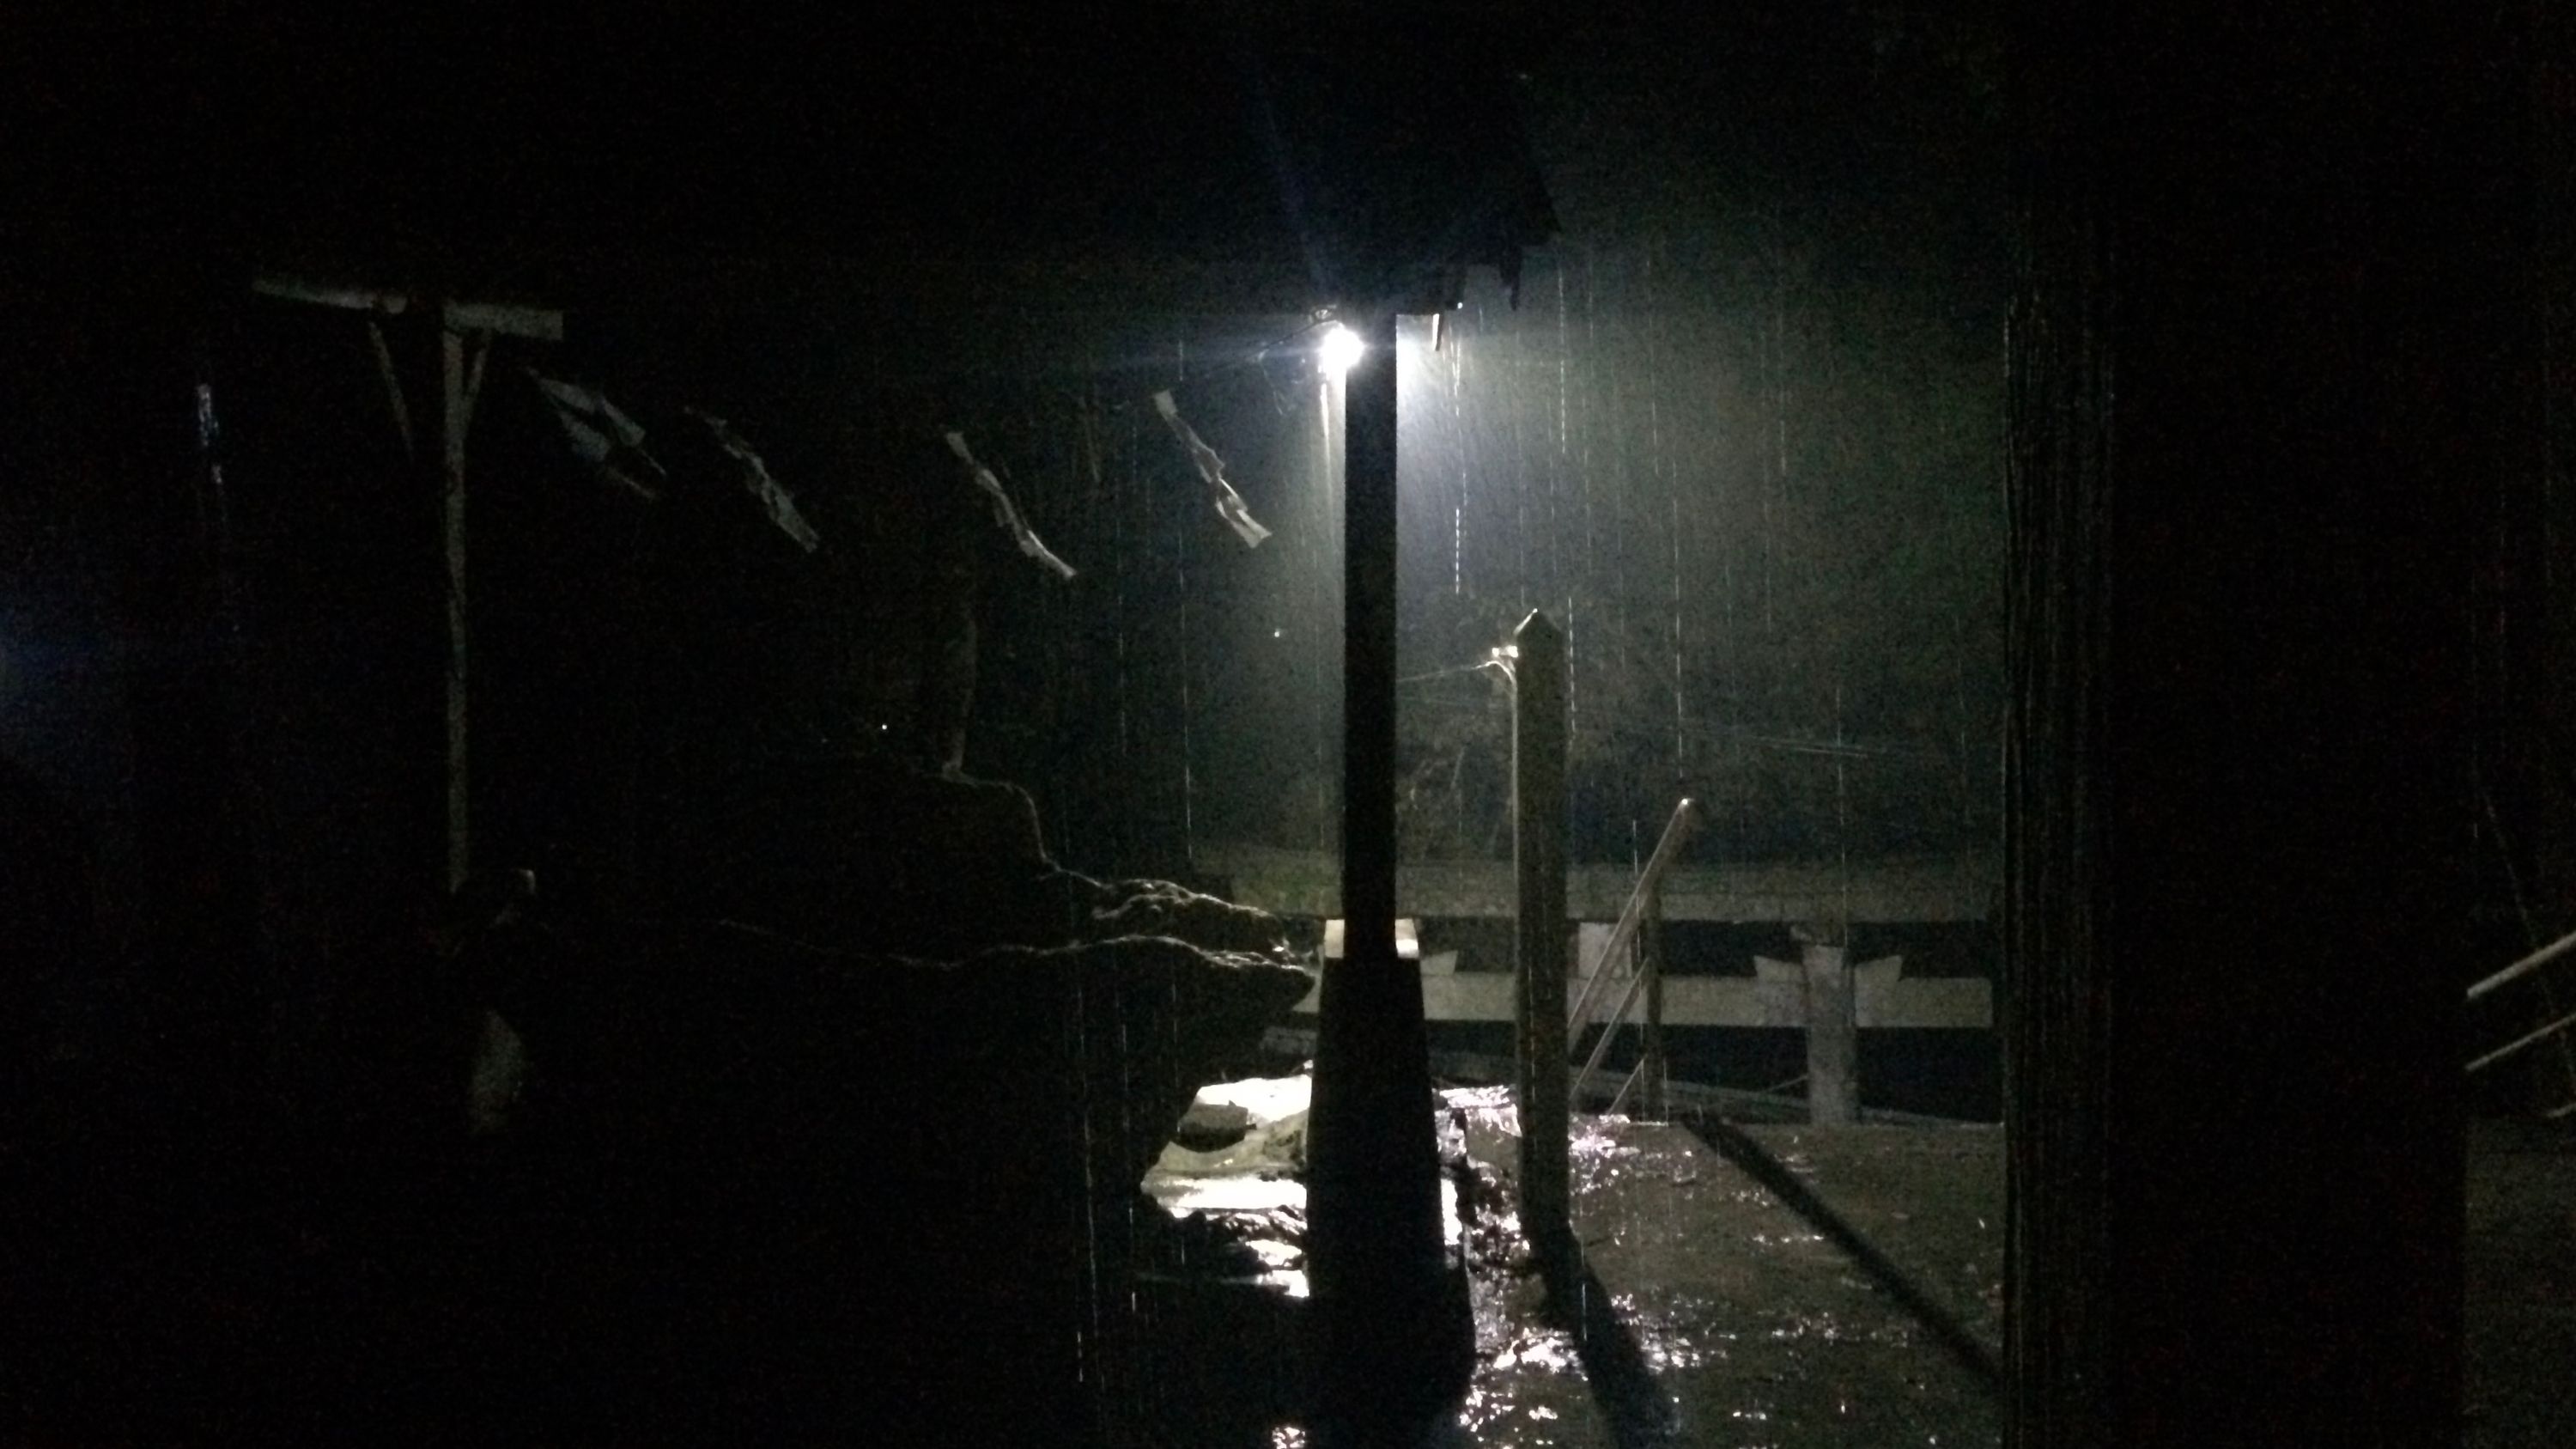 Heavy rain falling at night as seen from the porch of a shrine, with a harsh light shining straight into the camera.